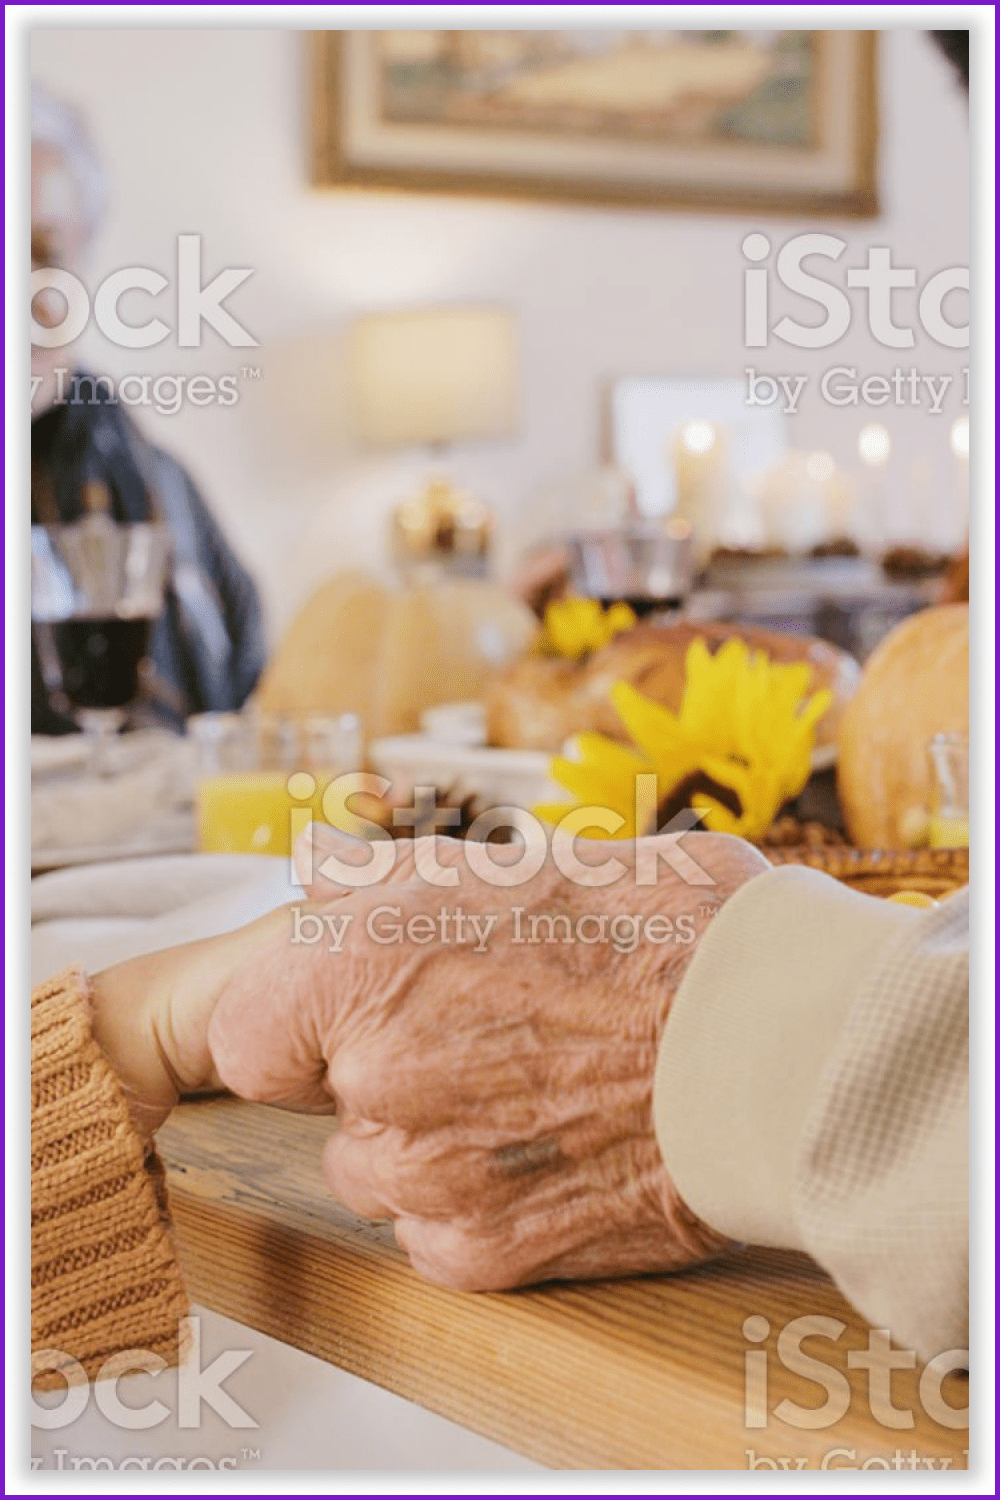 Grandmother's hand holding granddaughter's hand while praying during thanksgiving dinner.